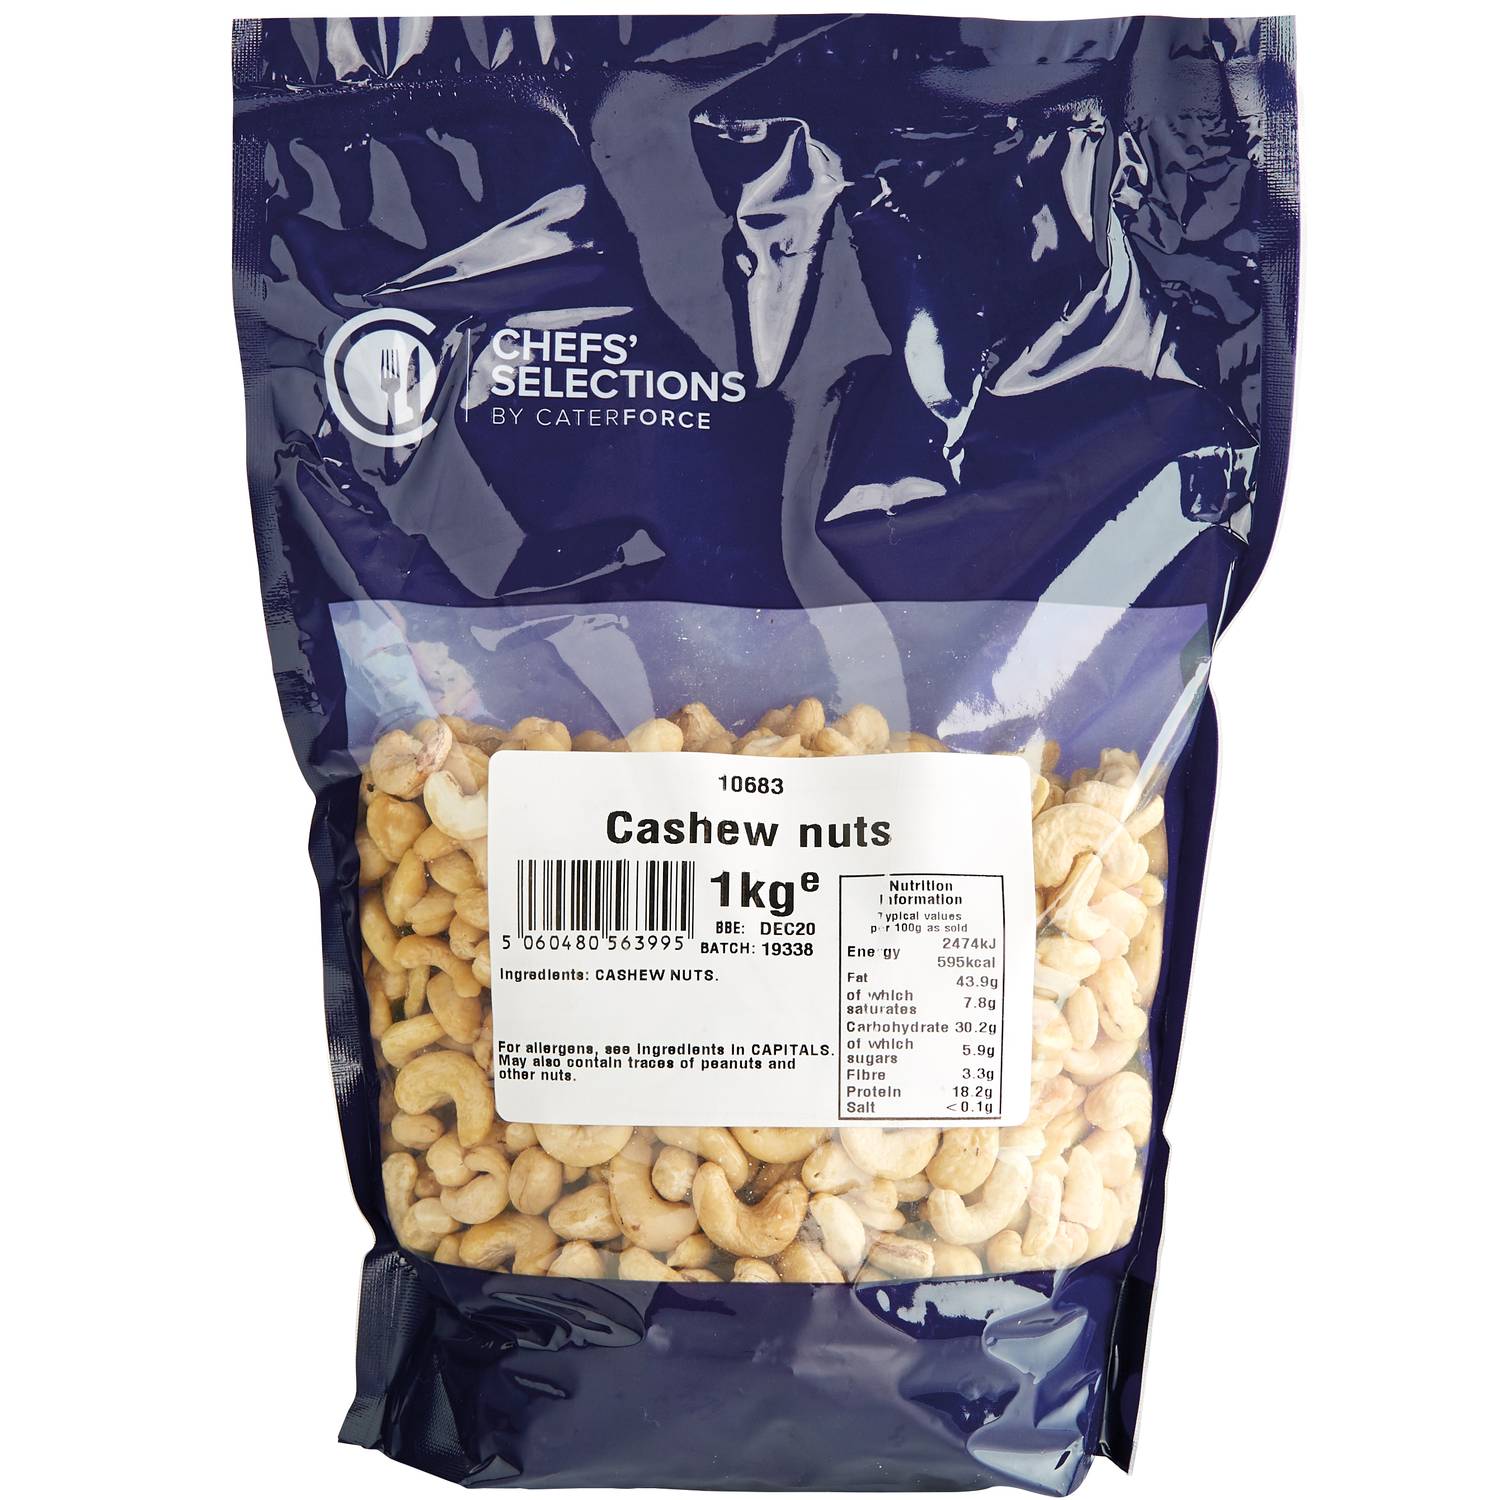 Chefs’ Selections Cashew Nuts (6 x 1kg)